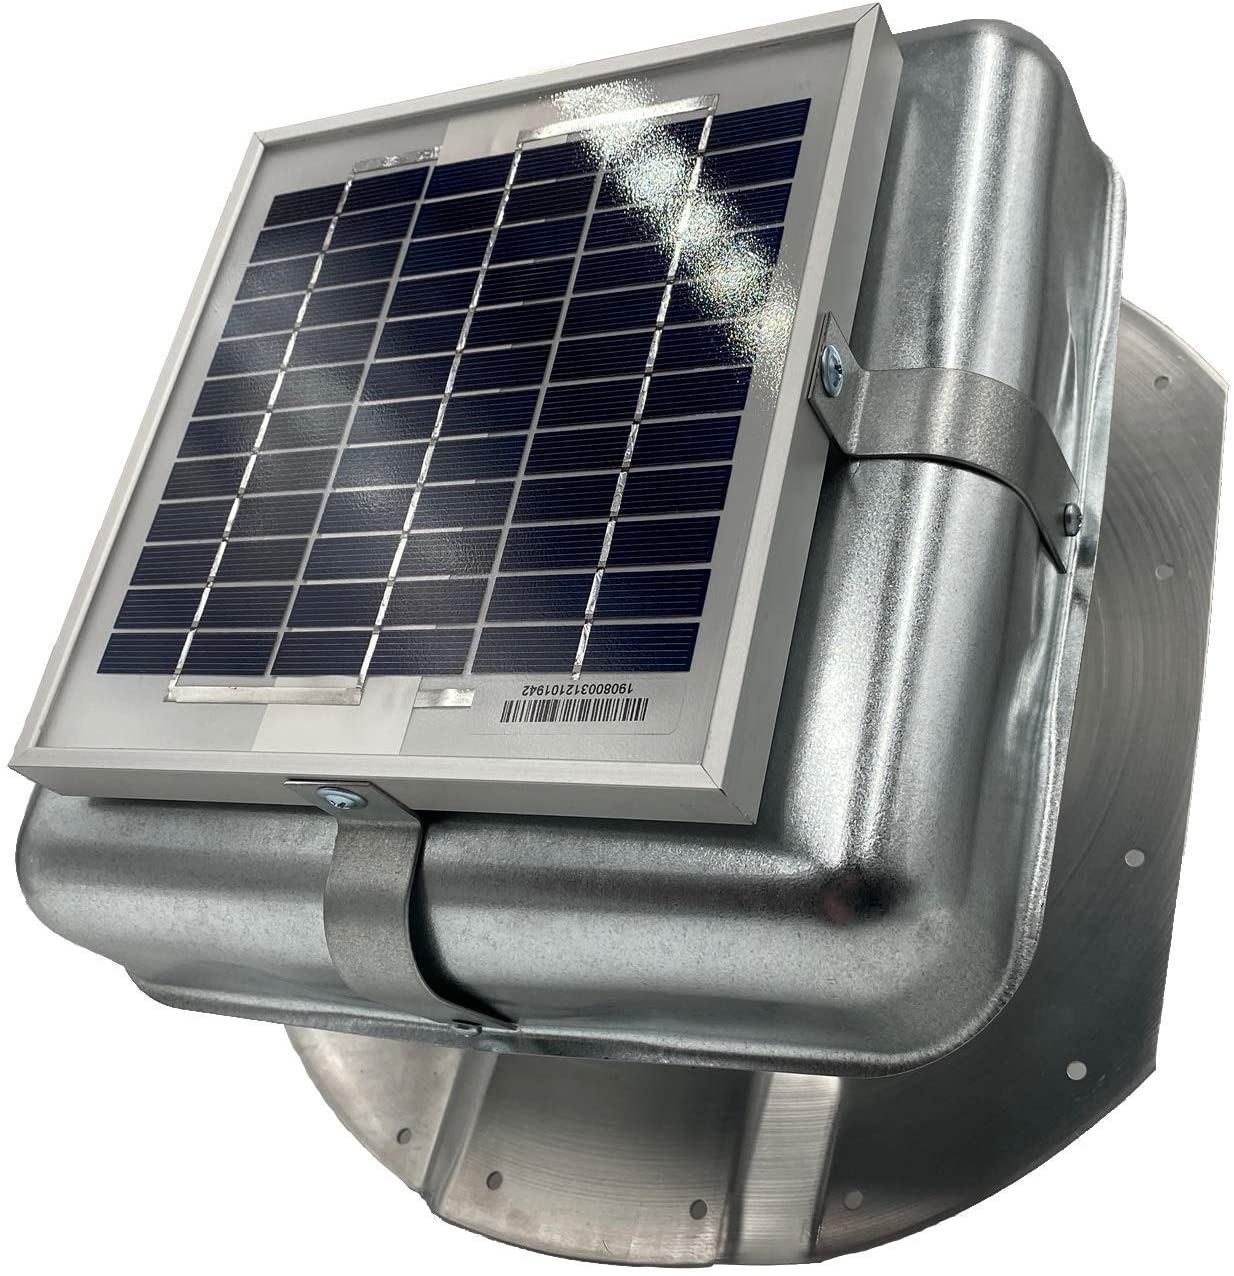 Shipping Container Solar Powered Vent - Fits Conex Containers